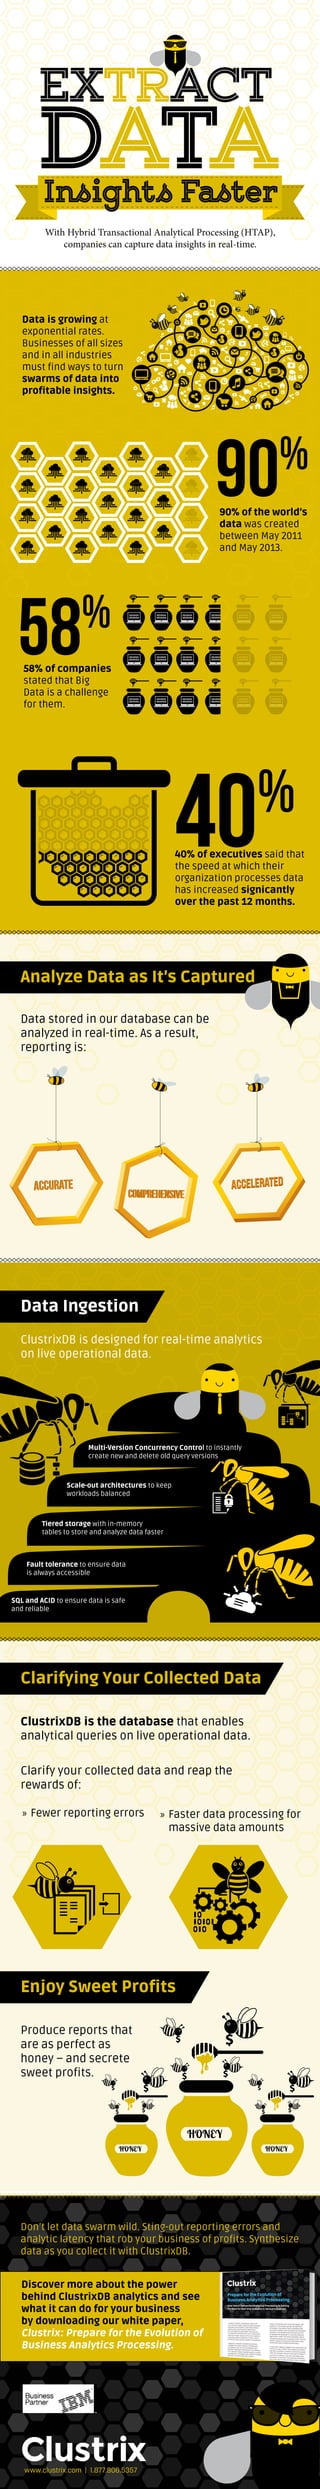 EXTRACT
DATA
ClustrixDB is designed for real-time analytics
on live operational data.
ClustrixDB is the database that enables
analytical queries on live operational data.
Clarify your collected data and reap the
rewards of:
Produce reports that
are as perfect as
honey – and secrete
sweet profits.
Don’t let data swarm wild. Sting-out reporting errors and
analytic latency that rob your business of profits. Synthesize
data as you collect it with ClustrixDB.
www.clustrix.com | 1.877.806.5357
Discover more about the power
behind ClustrixDB analytics and see
what it can do for your business
by downloading our white paper,
Clustrix: Prepare for the Evolution of
Business Analytics Processing.
»» Fewer reporting errors »» Faster data processing for
massive data amounts
Insights Faster
With Hybrid Transactional Analytical Processing (HTAP),
companies can capture data insights in real-time.
Data is growing at
exponential rates.
Businesses of all sizes
and in all industries
must find ways to turn
swarms of data into
profitable insights.
90% of the world’s
data was created
between May 2011
and May 2013.
58% of companies
stated that Big
Data is a challenge
for them.
40% of executives said that
the speed at which their
organization processes data
has increased signiﬁcantly
over the past 12 months.
Data stored in our database can be
analyzed in real-time. As a result,
reporting is:
Multi-Version Concurrency Control to instantly
create new and delete old query versions
Scale-out architectures to keep
workloads balanced
Tiered storage with in-memory
tables to store and analyze data faster
Fault tolerance to ensure data
is always accessible
SQL and ACID to ensure data is safe
and reliable
90%
58%
40%
Analyze Data as It’s Captured
Clarifying Your Collected Data
Enjoy Sweet Profits
Data Ingestion
 